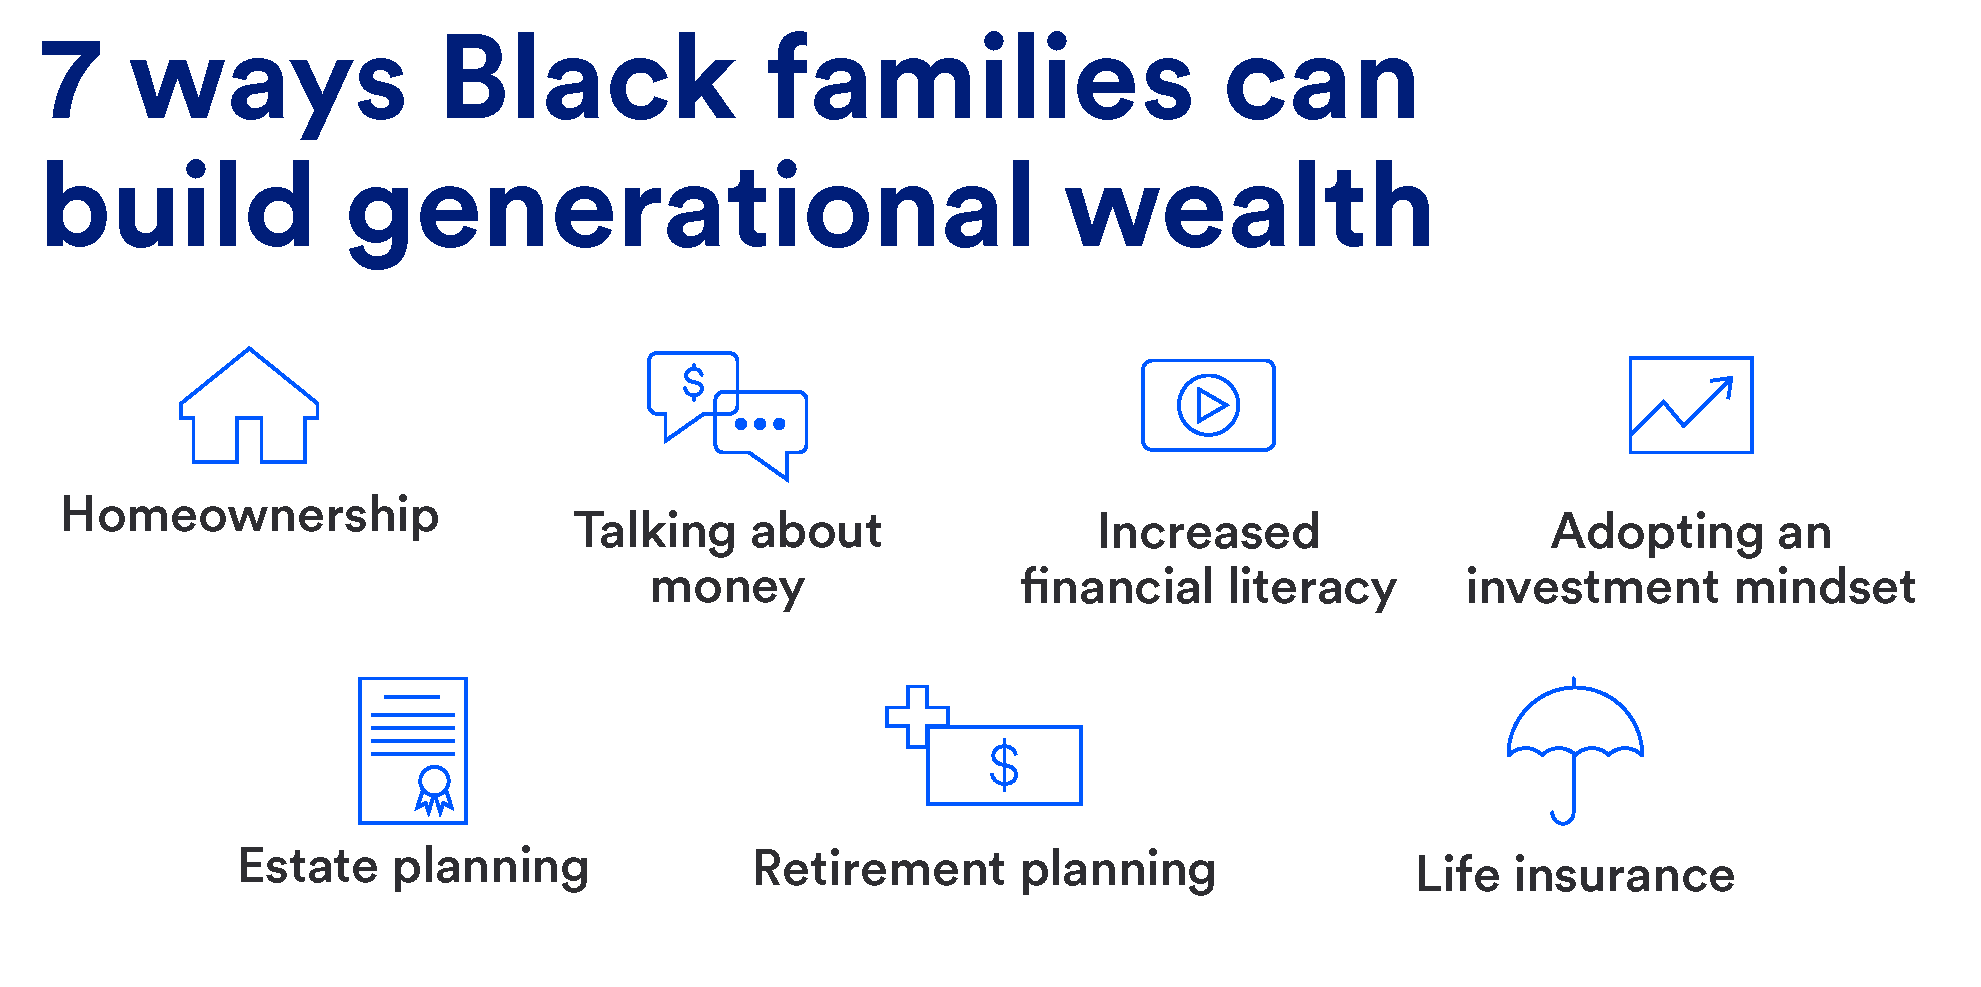 Black families can build generational wealth through homeownership, talking about money, growing their financial literacy, adopting an investment mindset, estate planning, retirement planning and purchasing life insurance. 